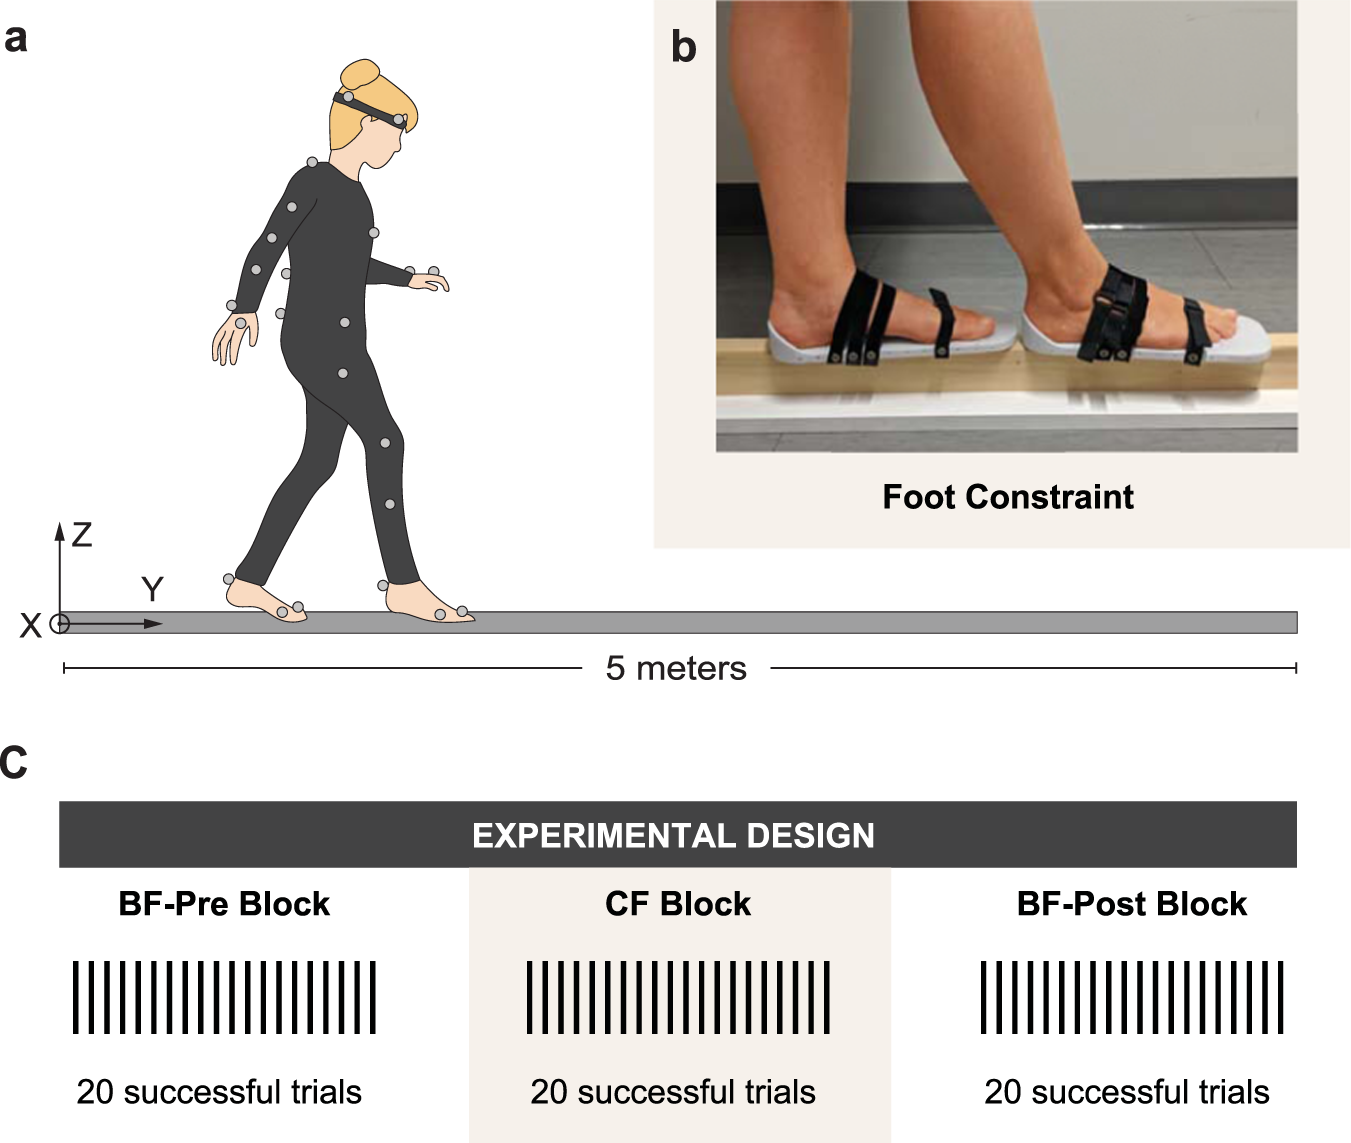 Rigid soles improve balance in beam walking, but improvements do not  persist with bare feet | Scientific Reports